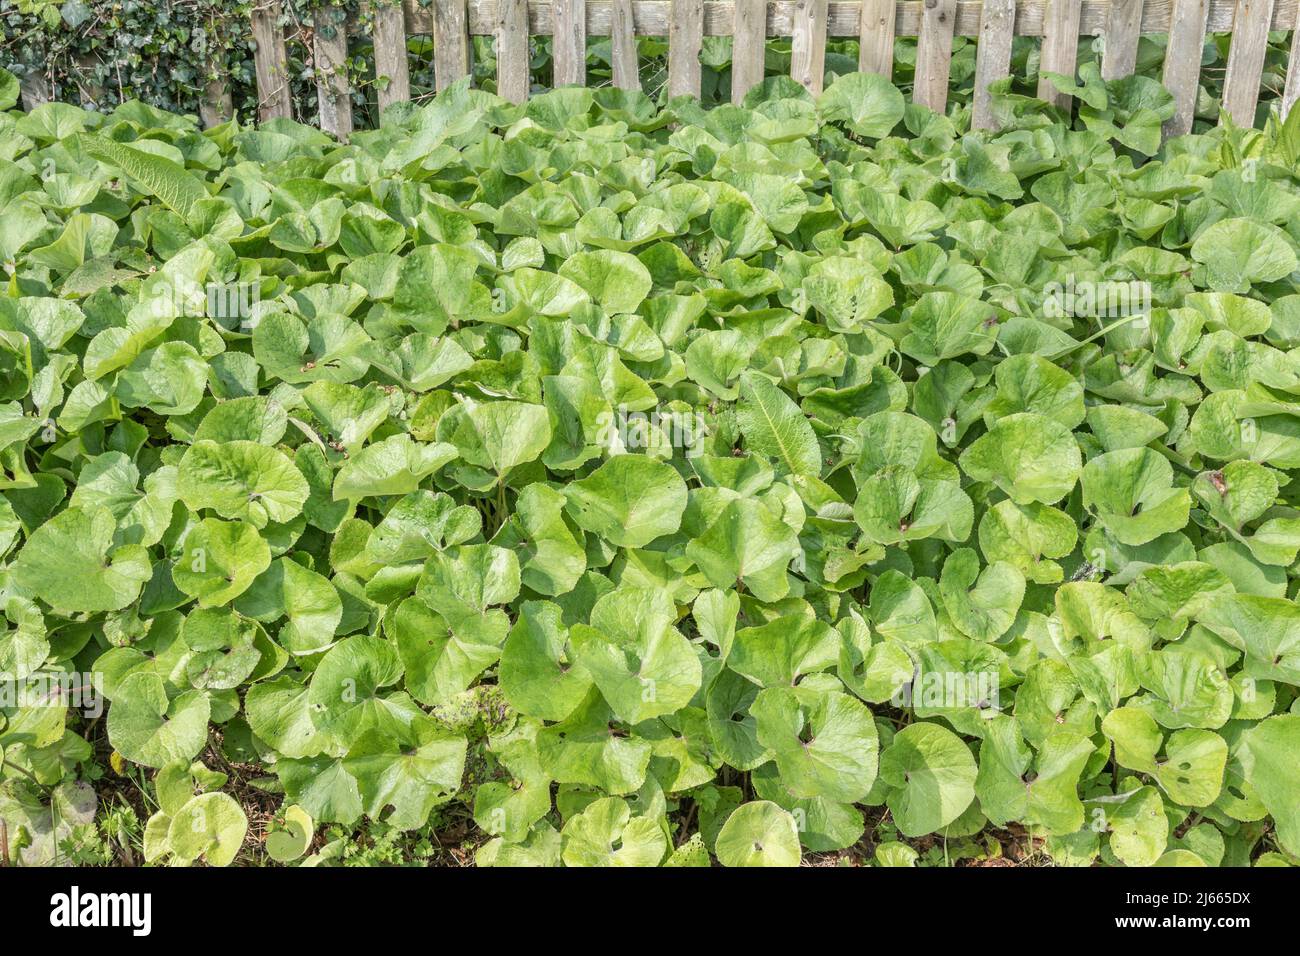 Butterbur / Petasites hybridus leaves in Spring. Once used as a medicinal plant in in herbal medicine - in treatment of the Plague. Stock Photo